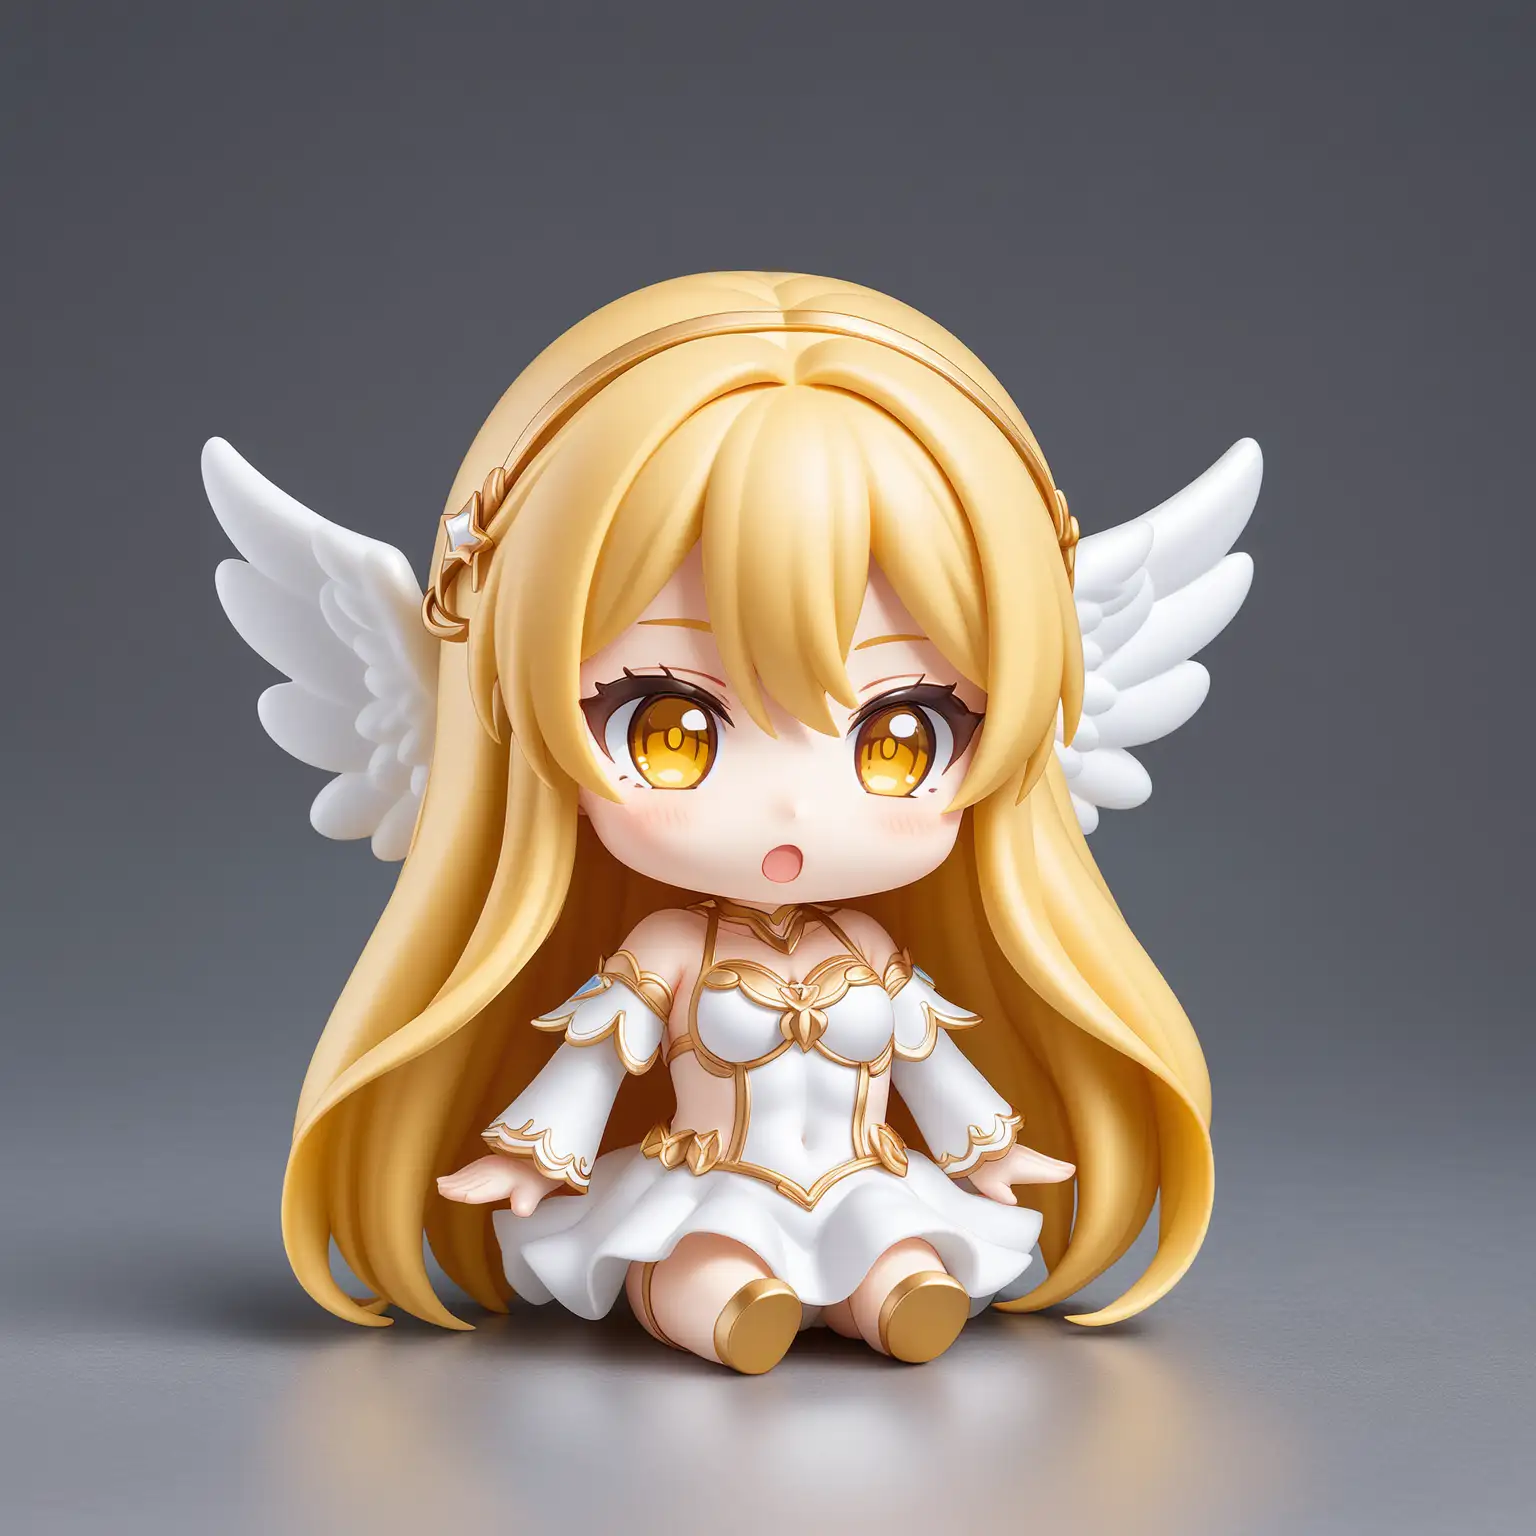 Chibi Anime Angel in Playful Pose Cute Blonde with Wings